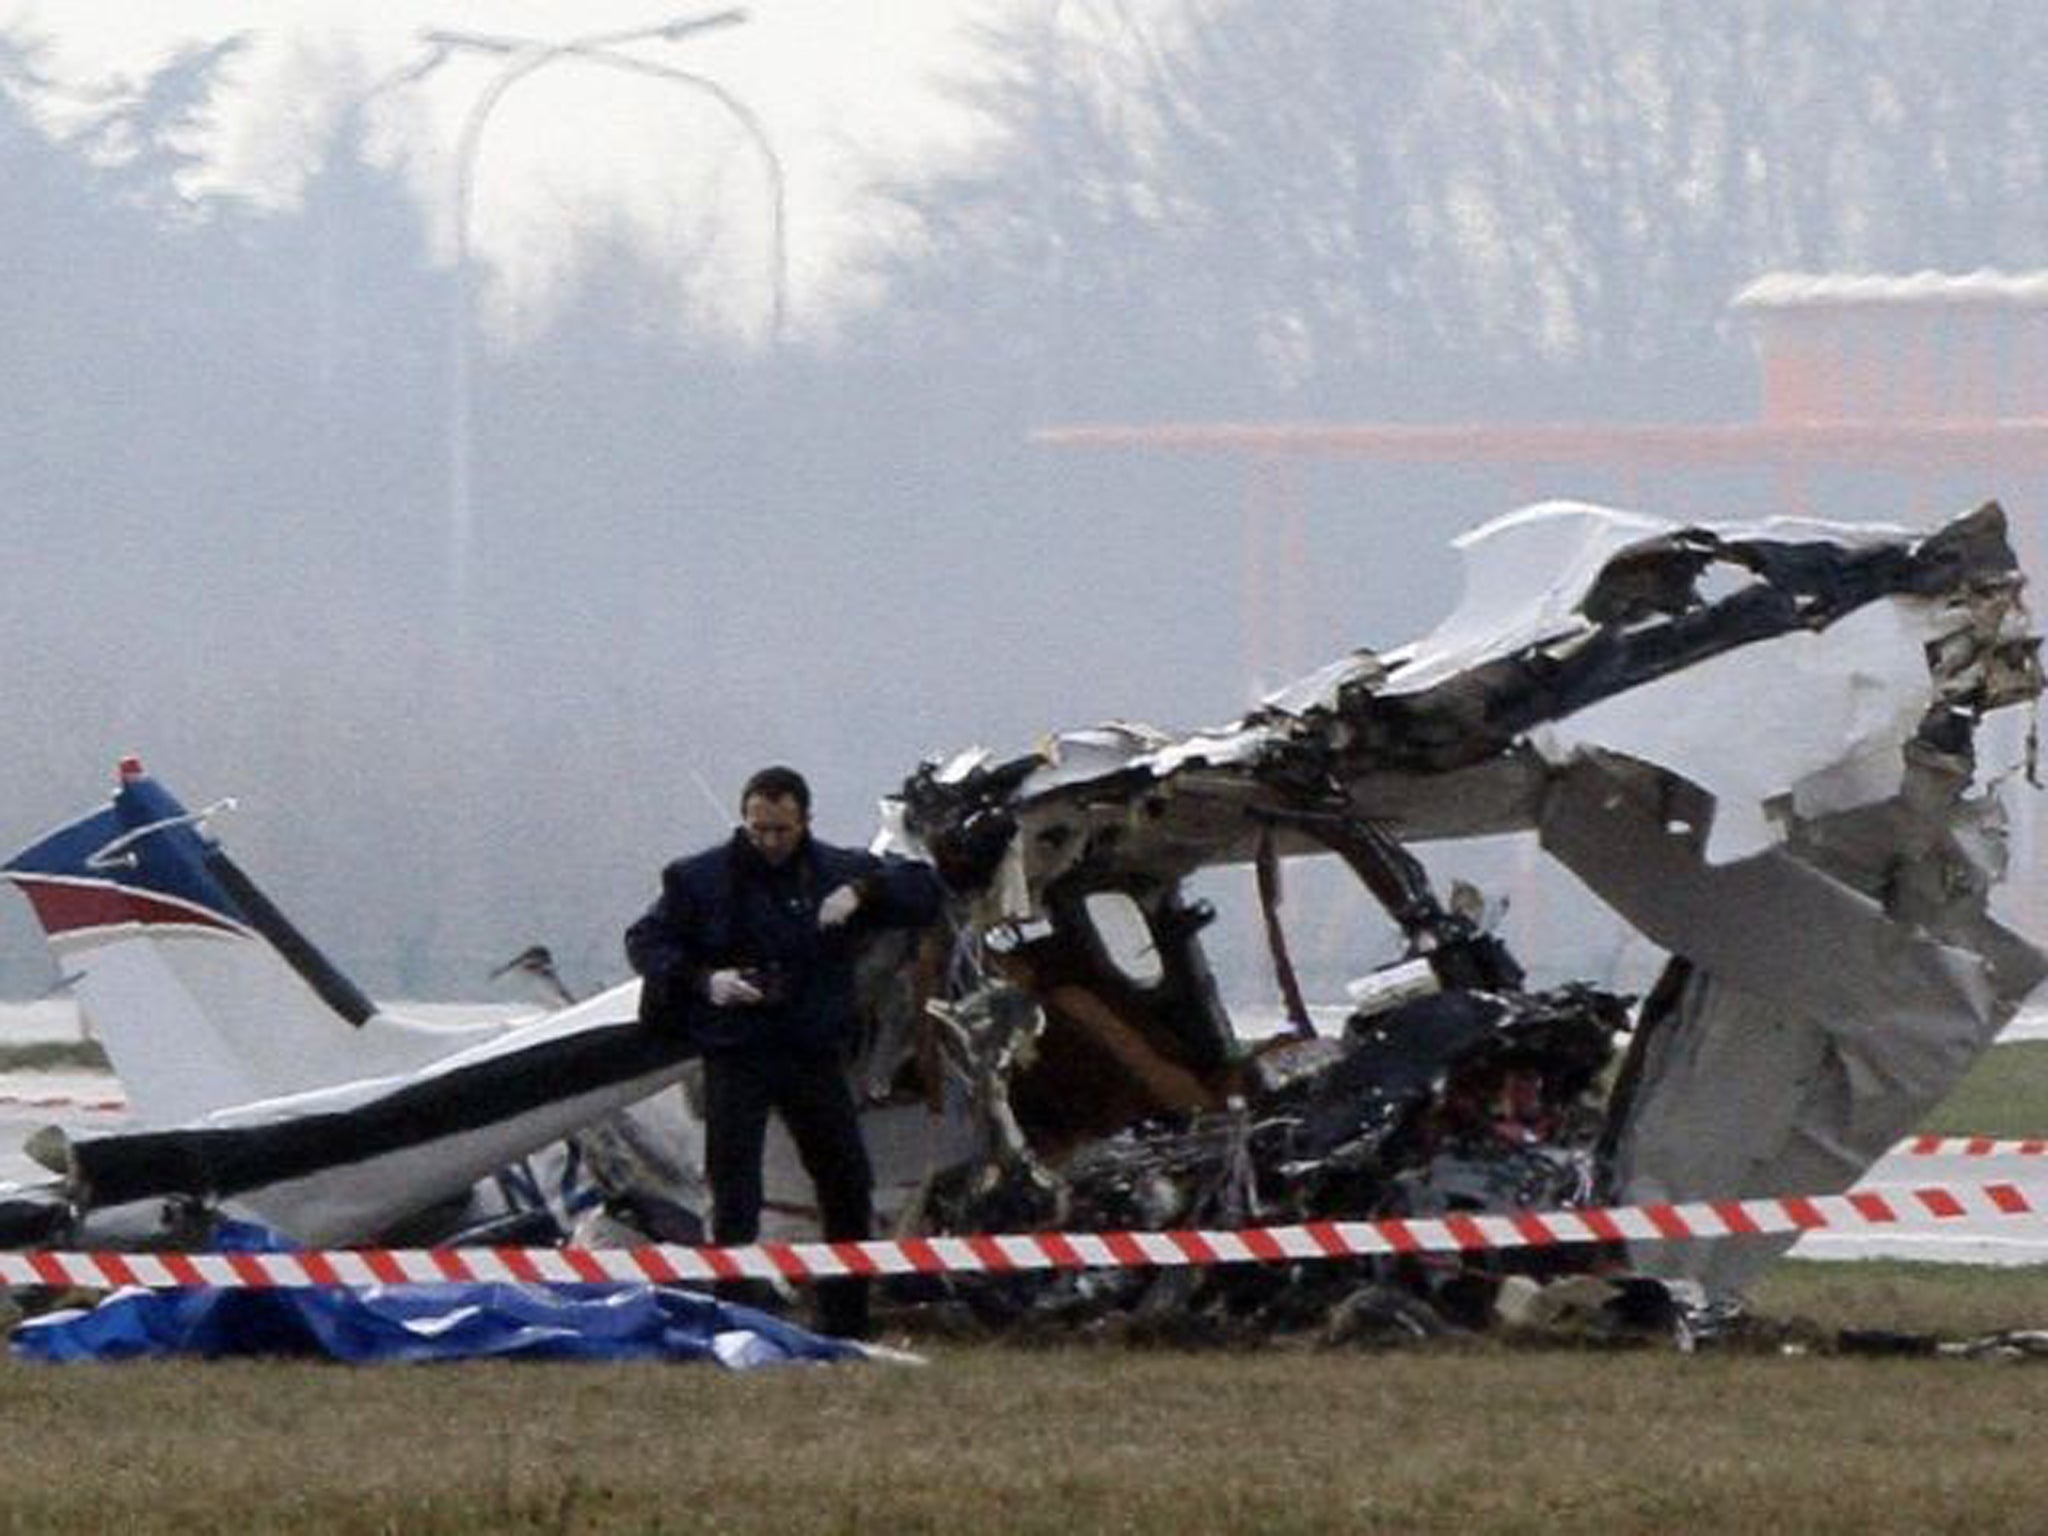 A police photographer inspects the scene of a tourist plane crash at Charleroi airport